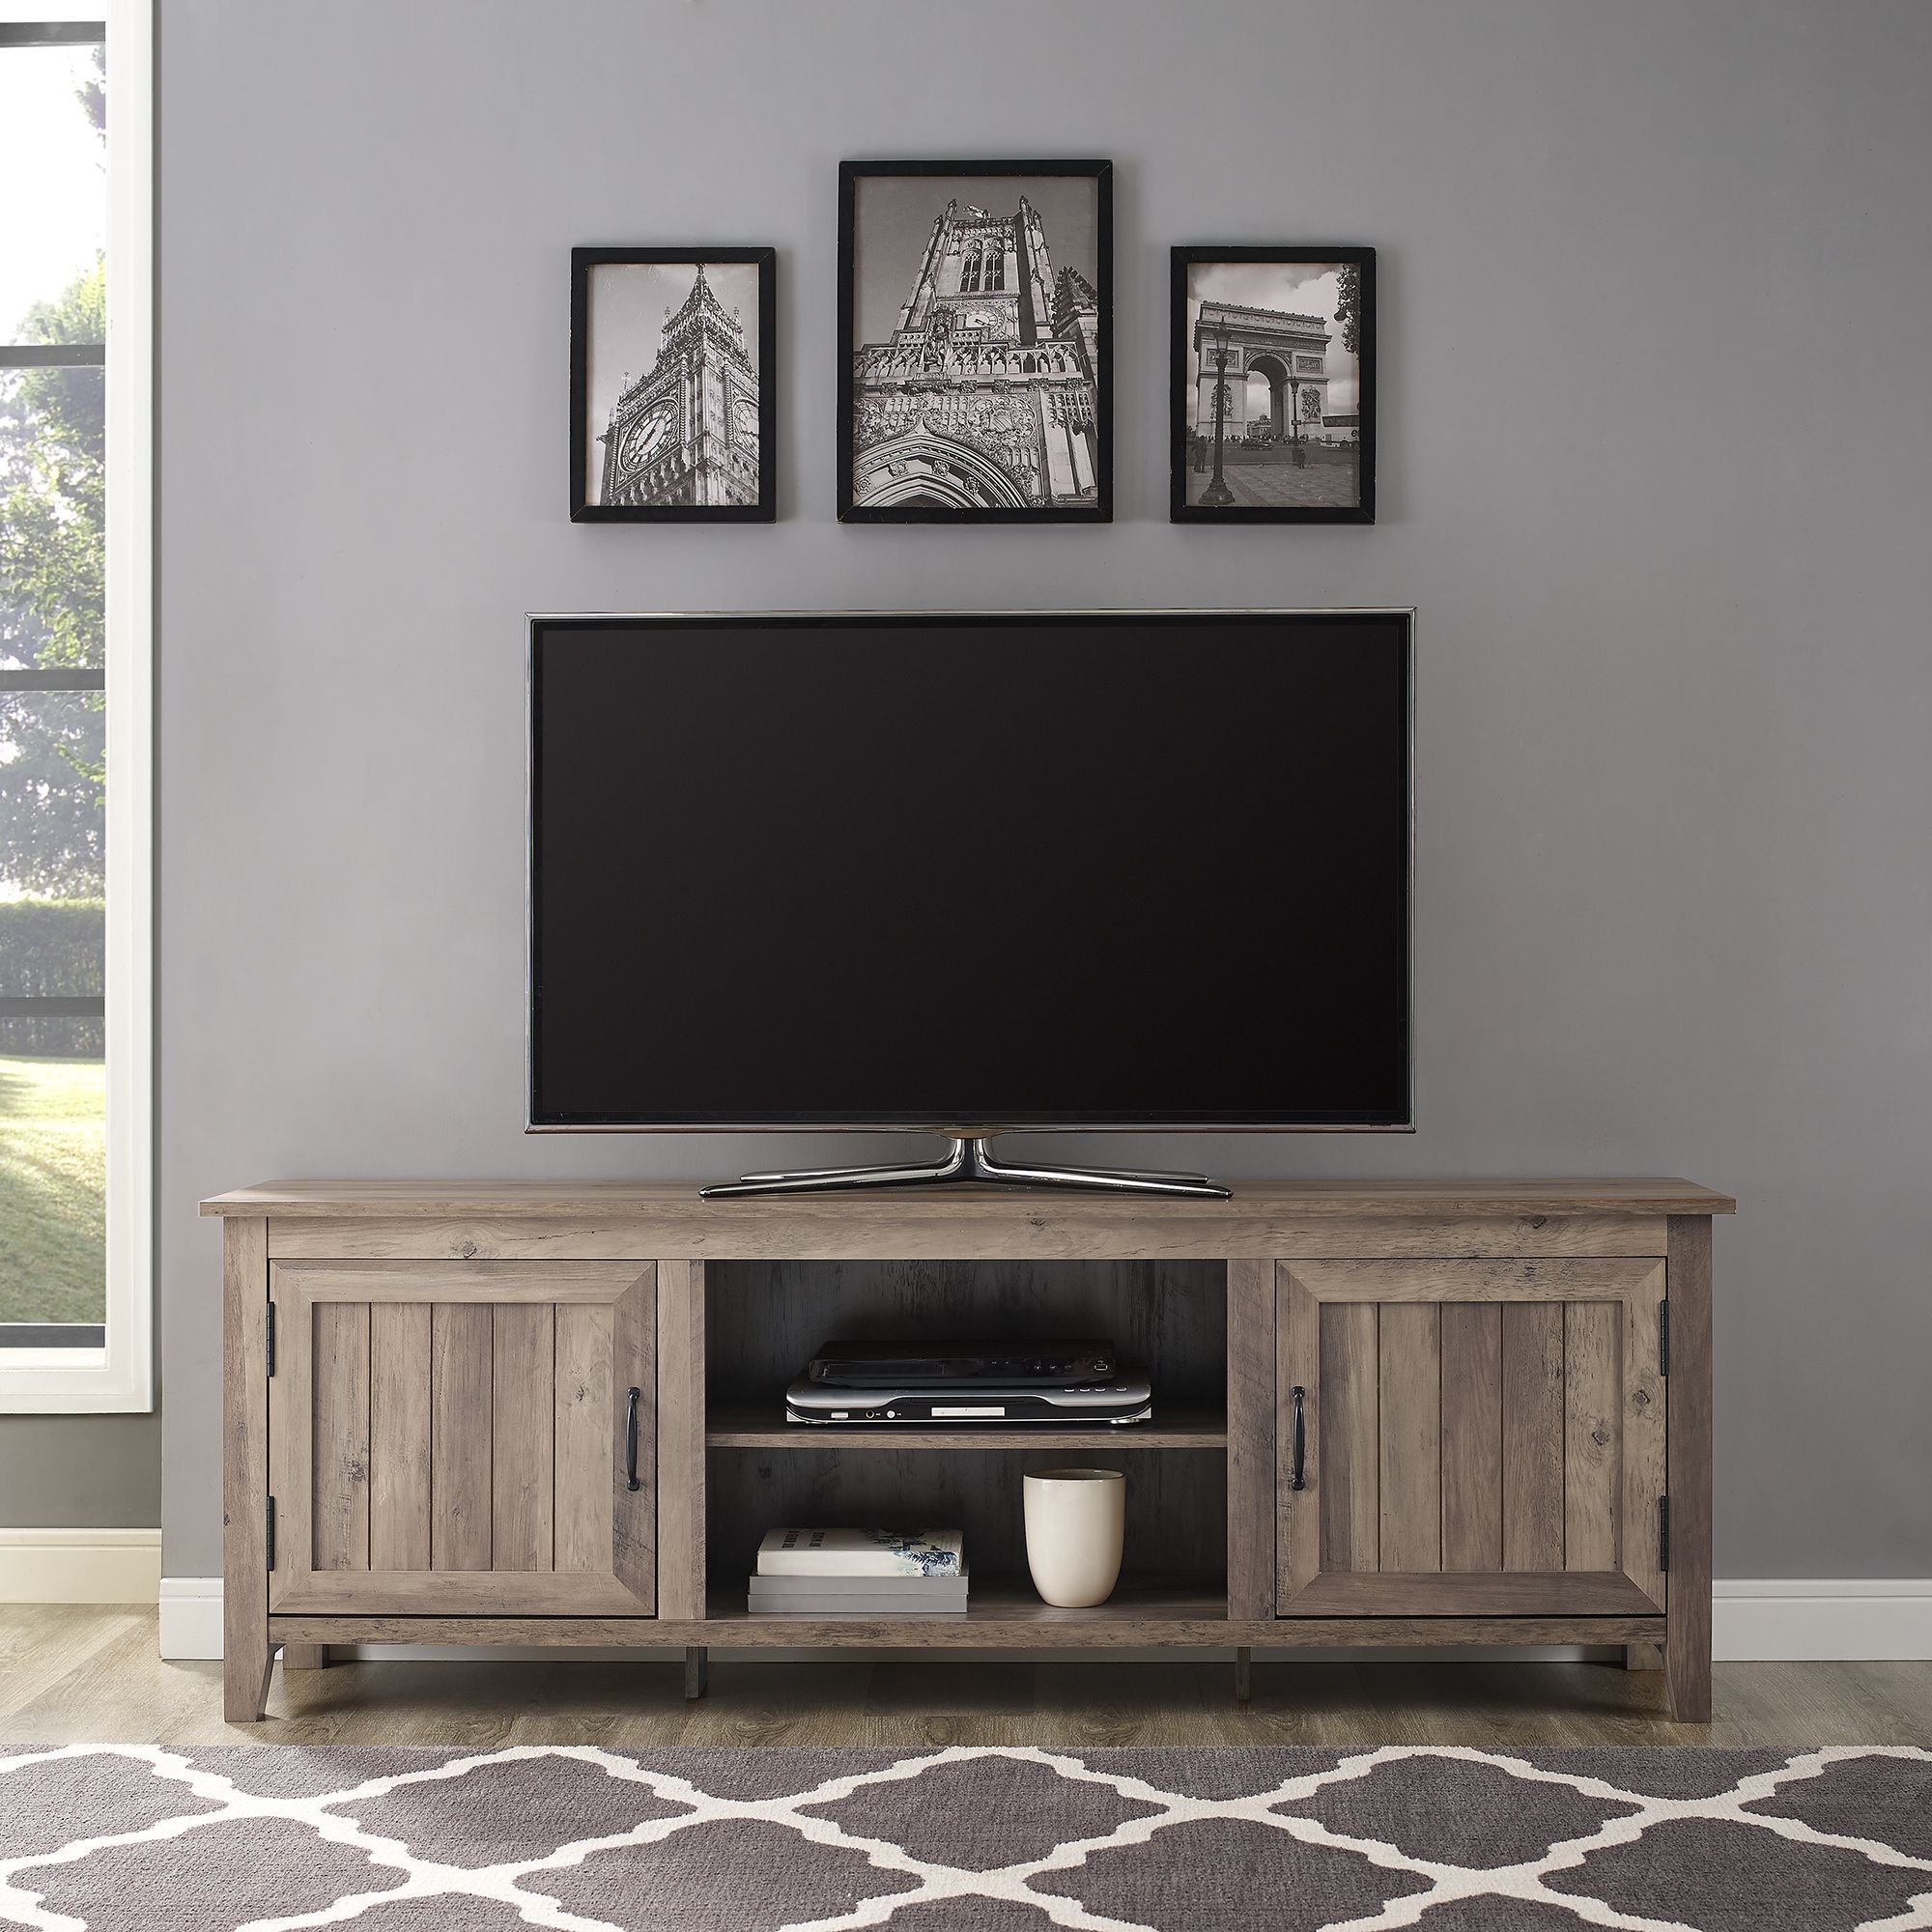 Woven Paths Farmhouse Grooved Door Tv Stand For Tvs Up To With Regard To Woven Paths Barn Door Tv Stands In Multiple Finishes (Photo 4 of 15)